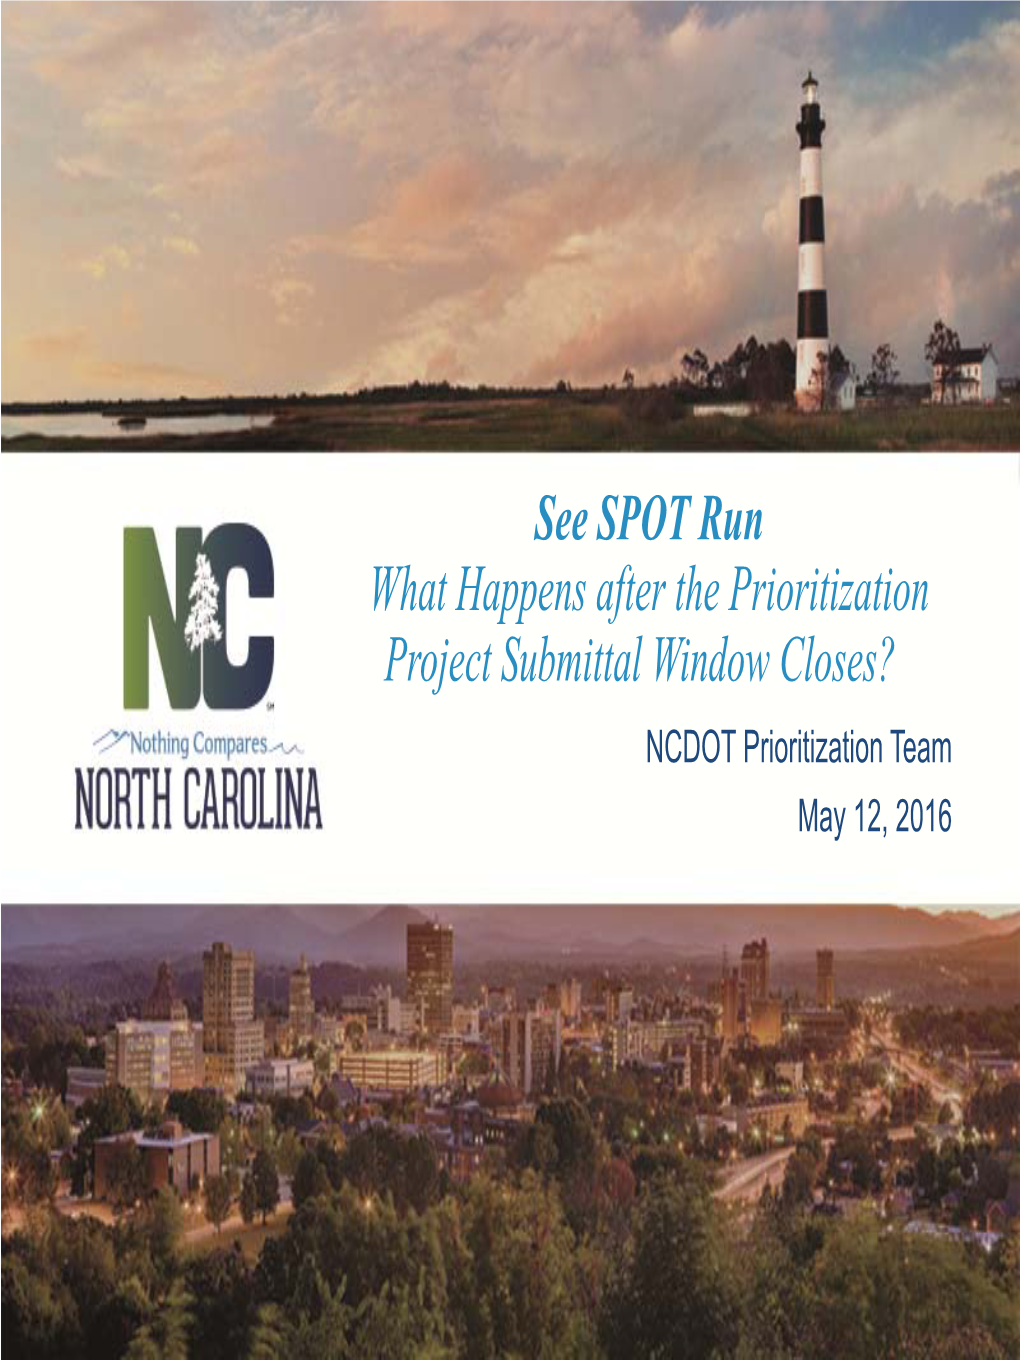 See SPOT Run What Happens After the Prioritization Project Submittal Window Closes? NCDOT Prioritization Team May 12, 2016 Prioritization 4.0 (P4.0) Timeline